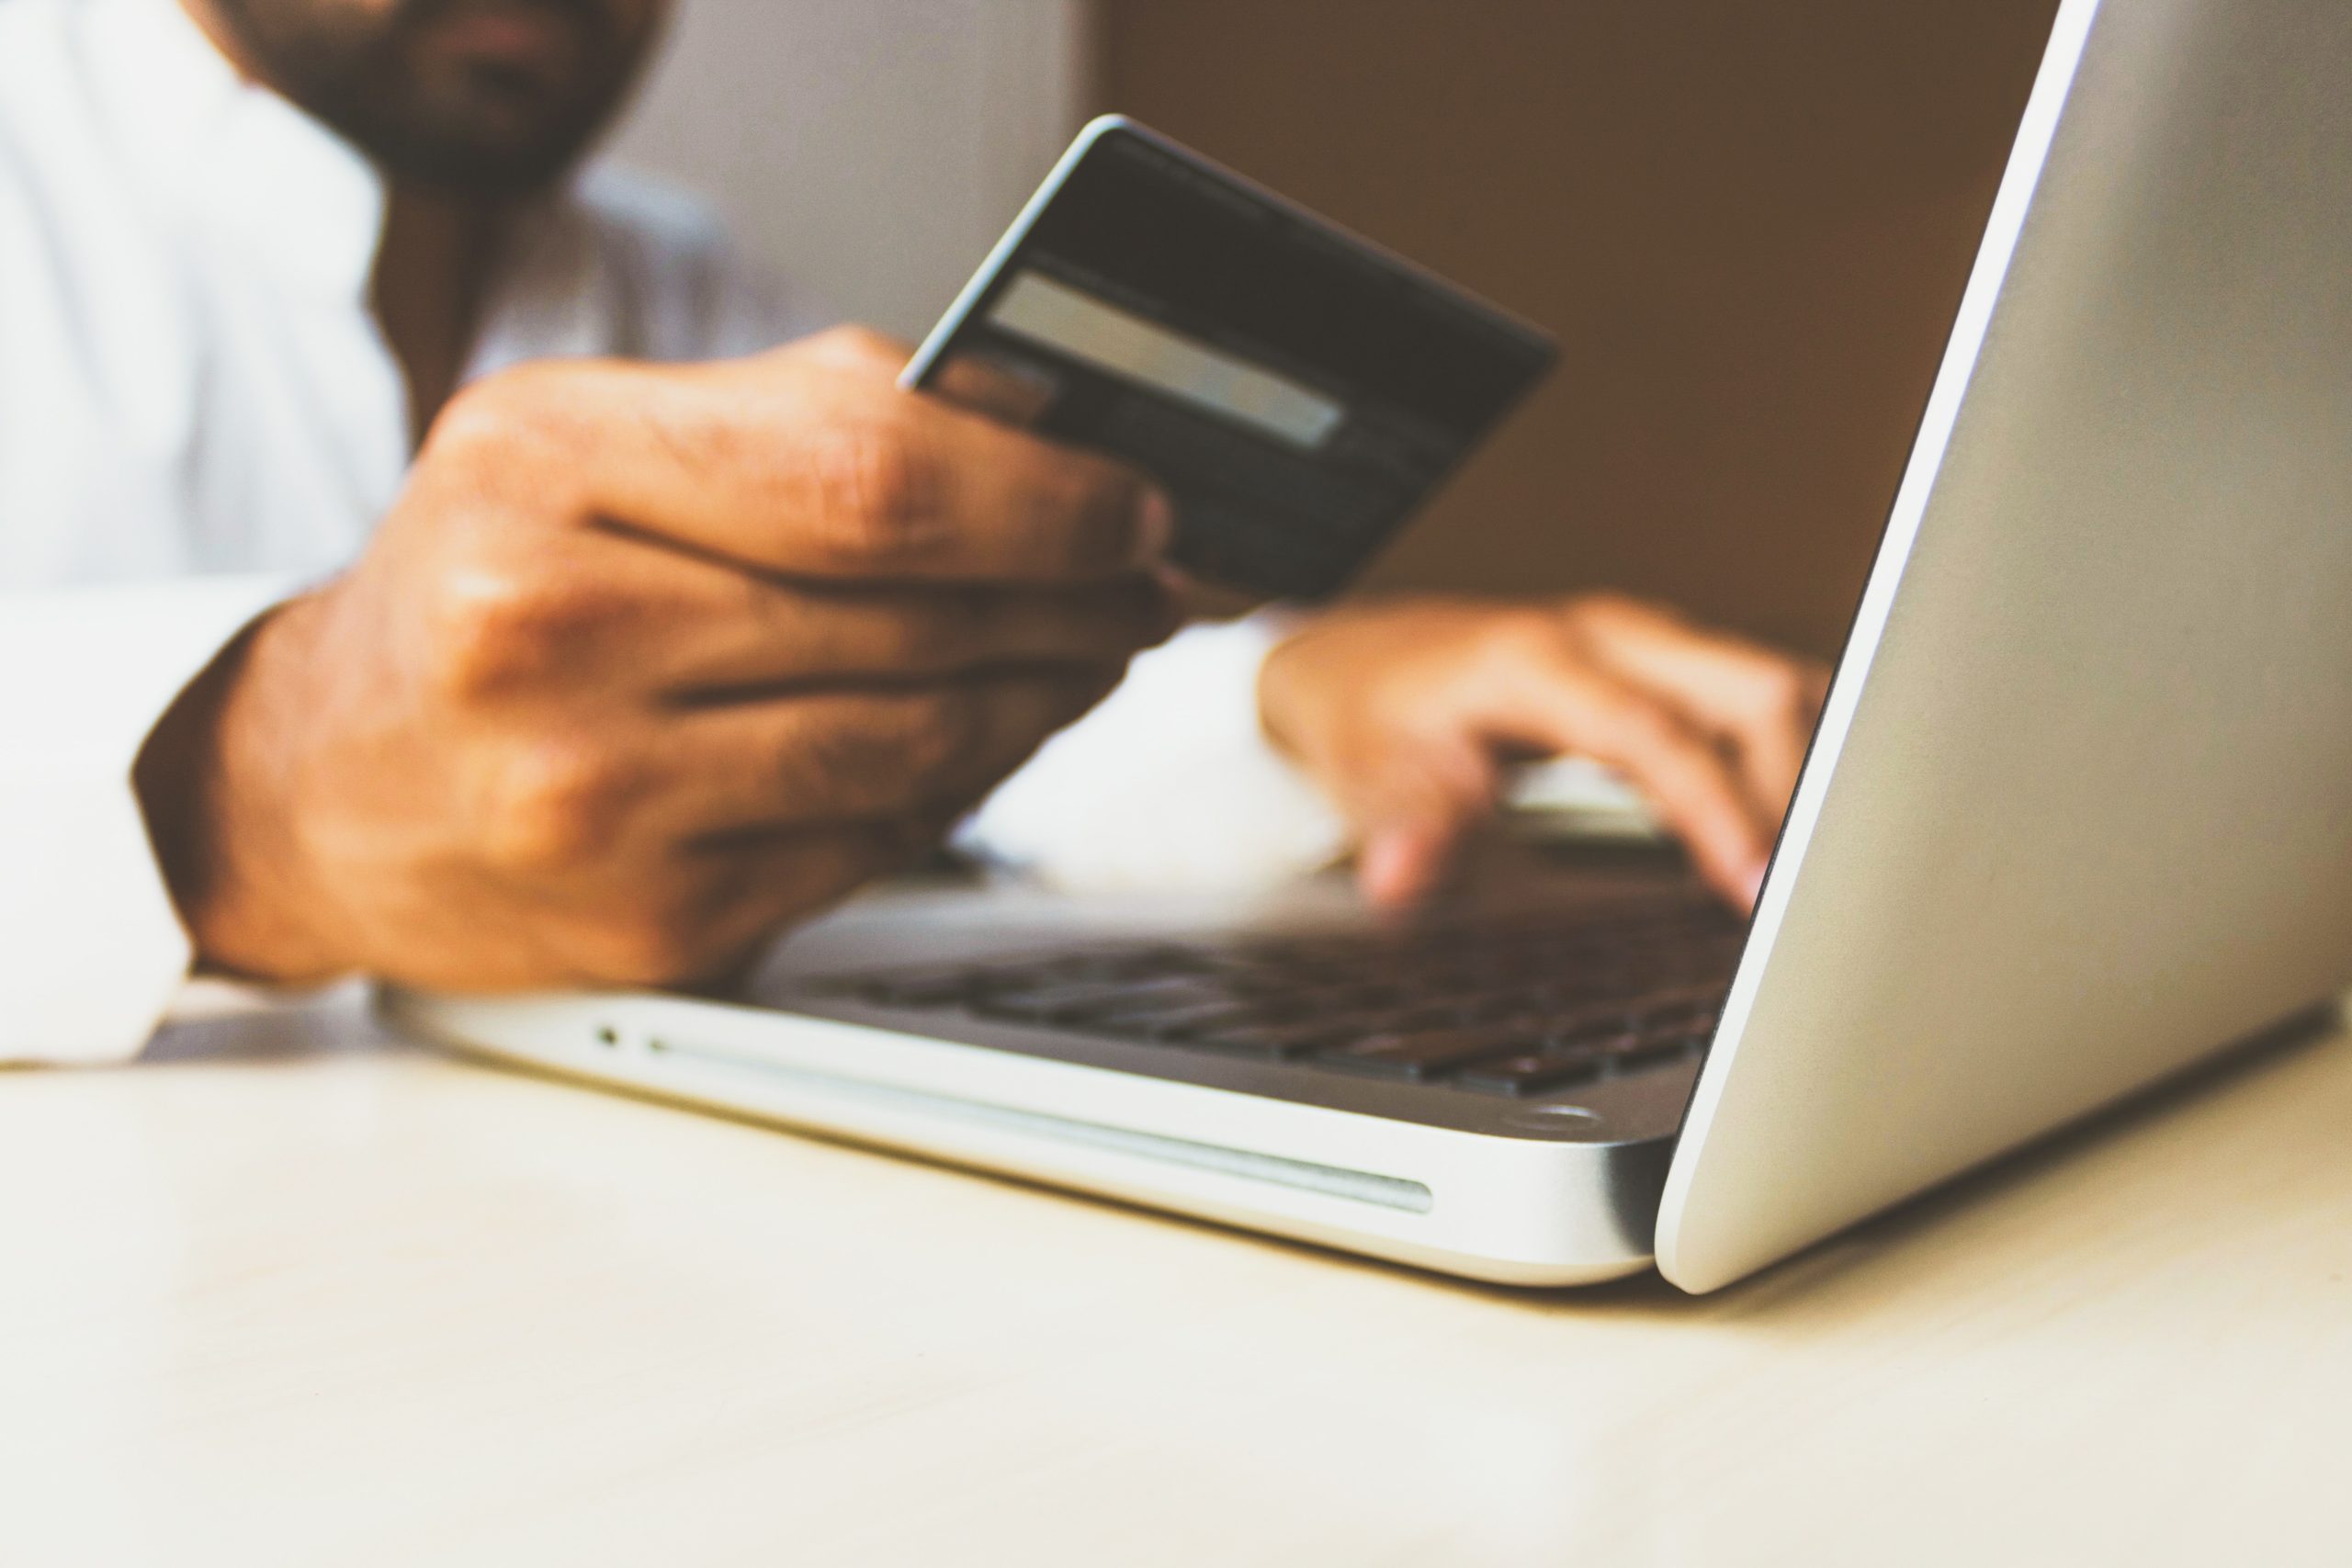 Online credit card purchase